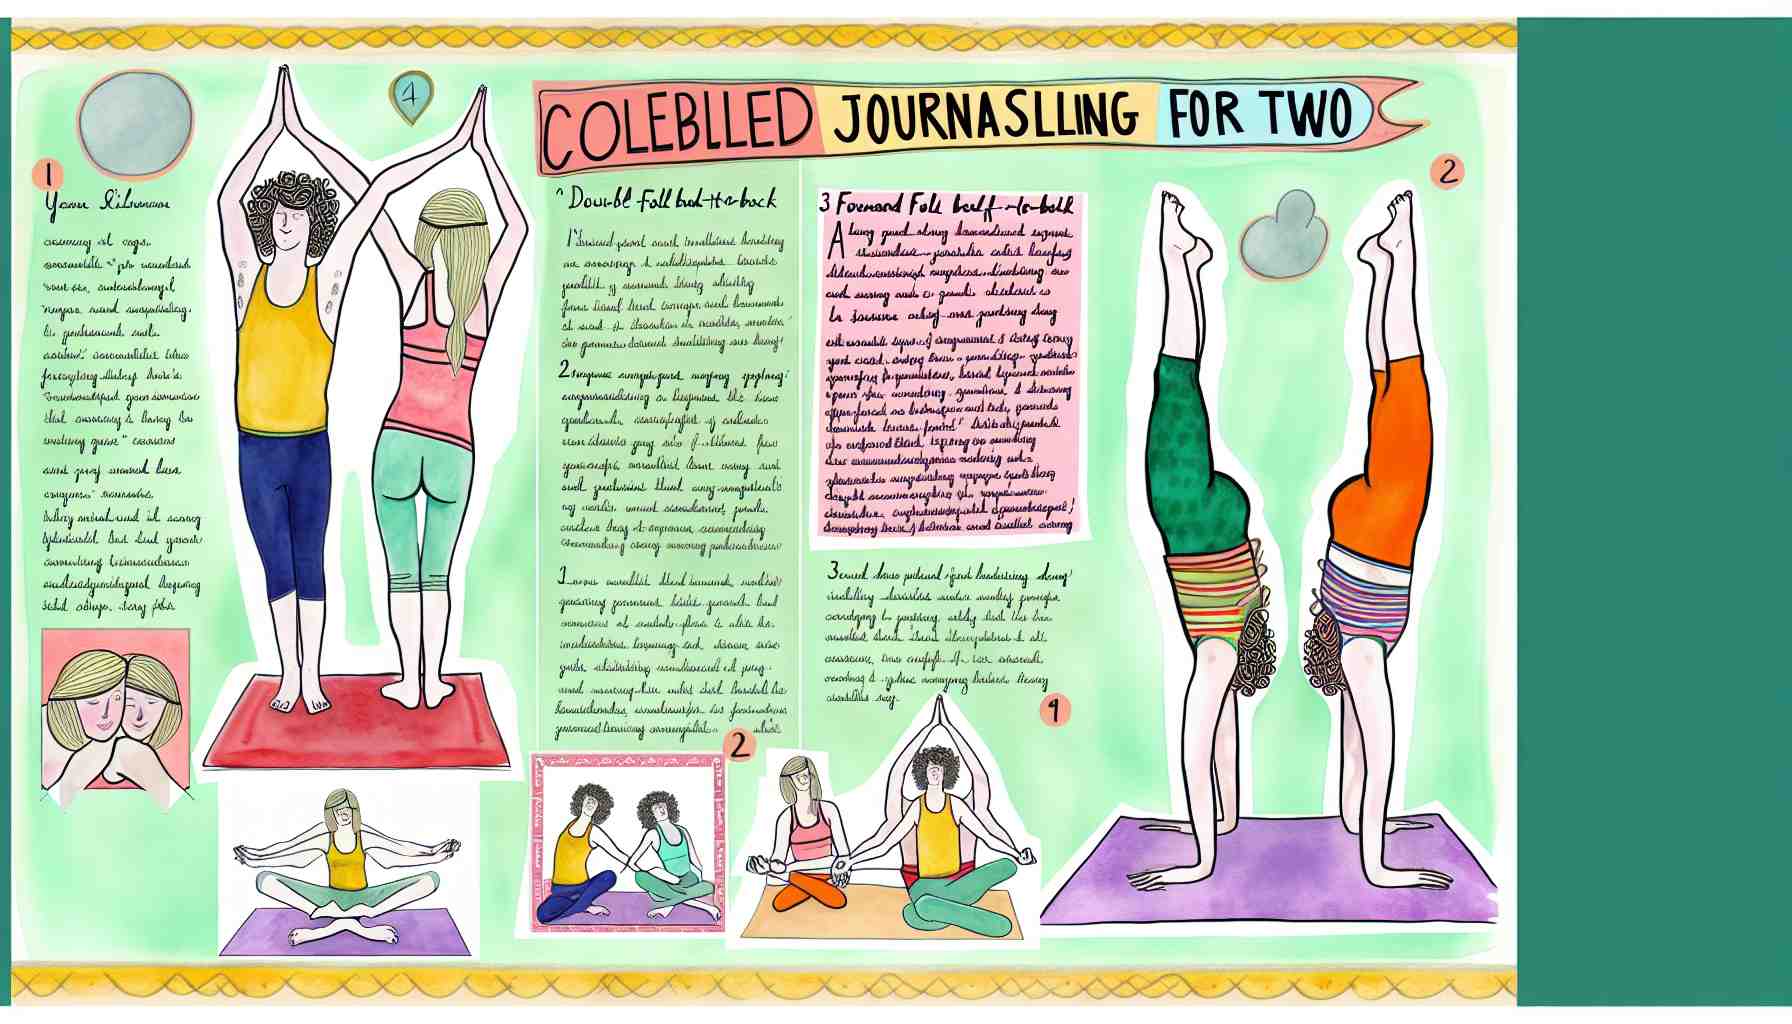 Bend it like besties with our lowdown on the top yoga poses for two! Learn titillating twists – from intimate to insane – that'll wow your followers and flatten that quarantine flab.